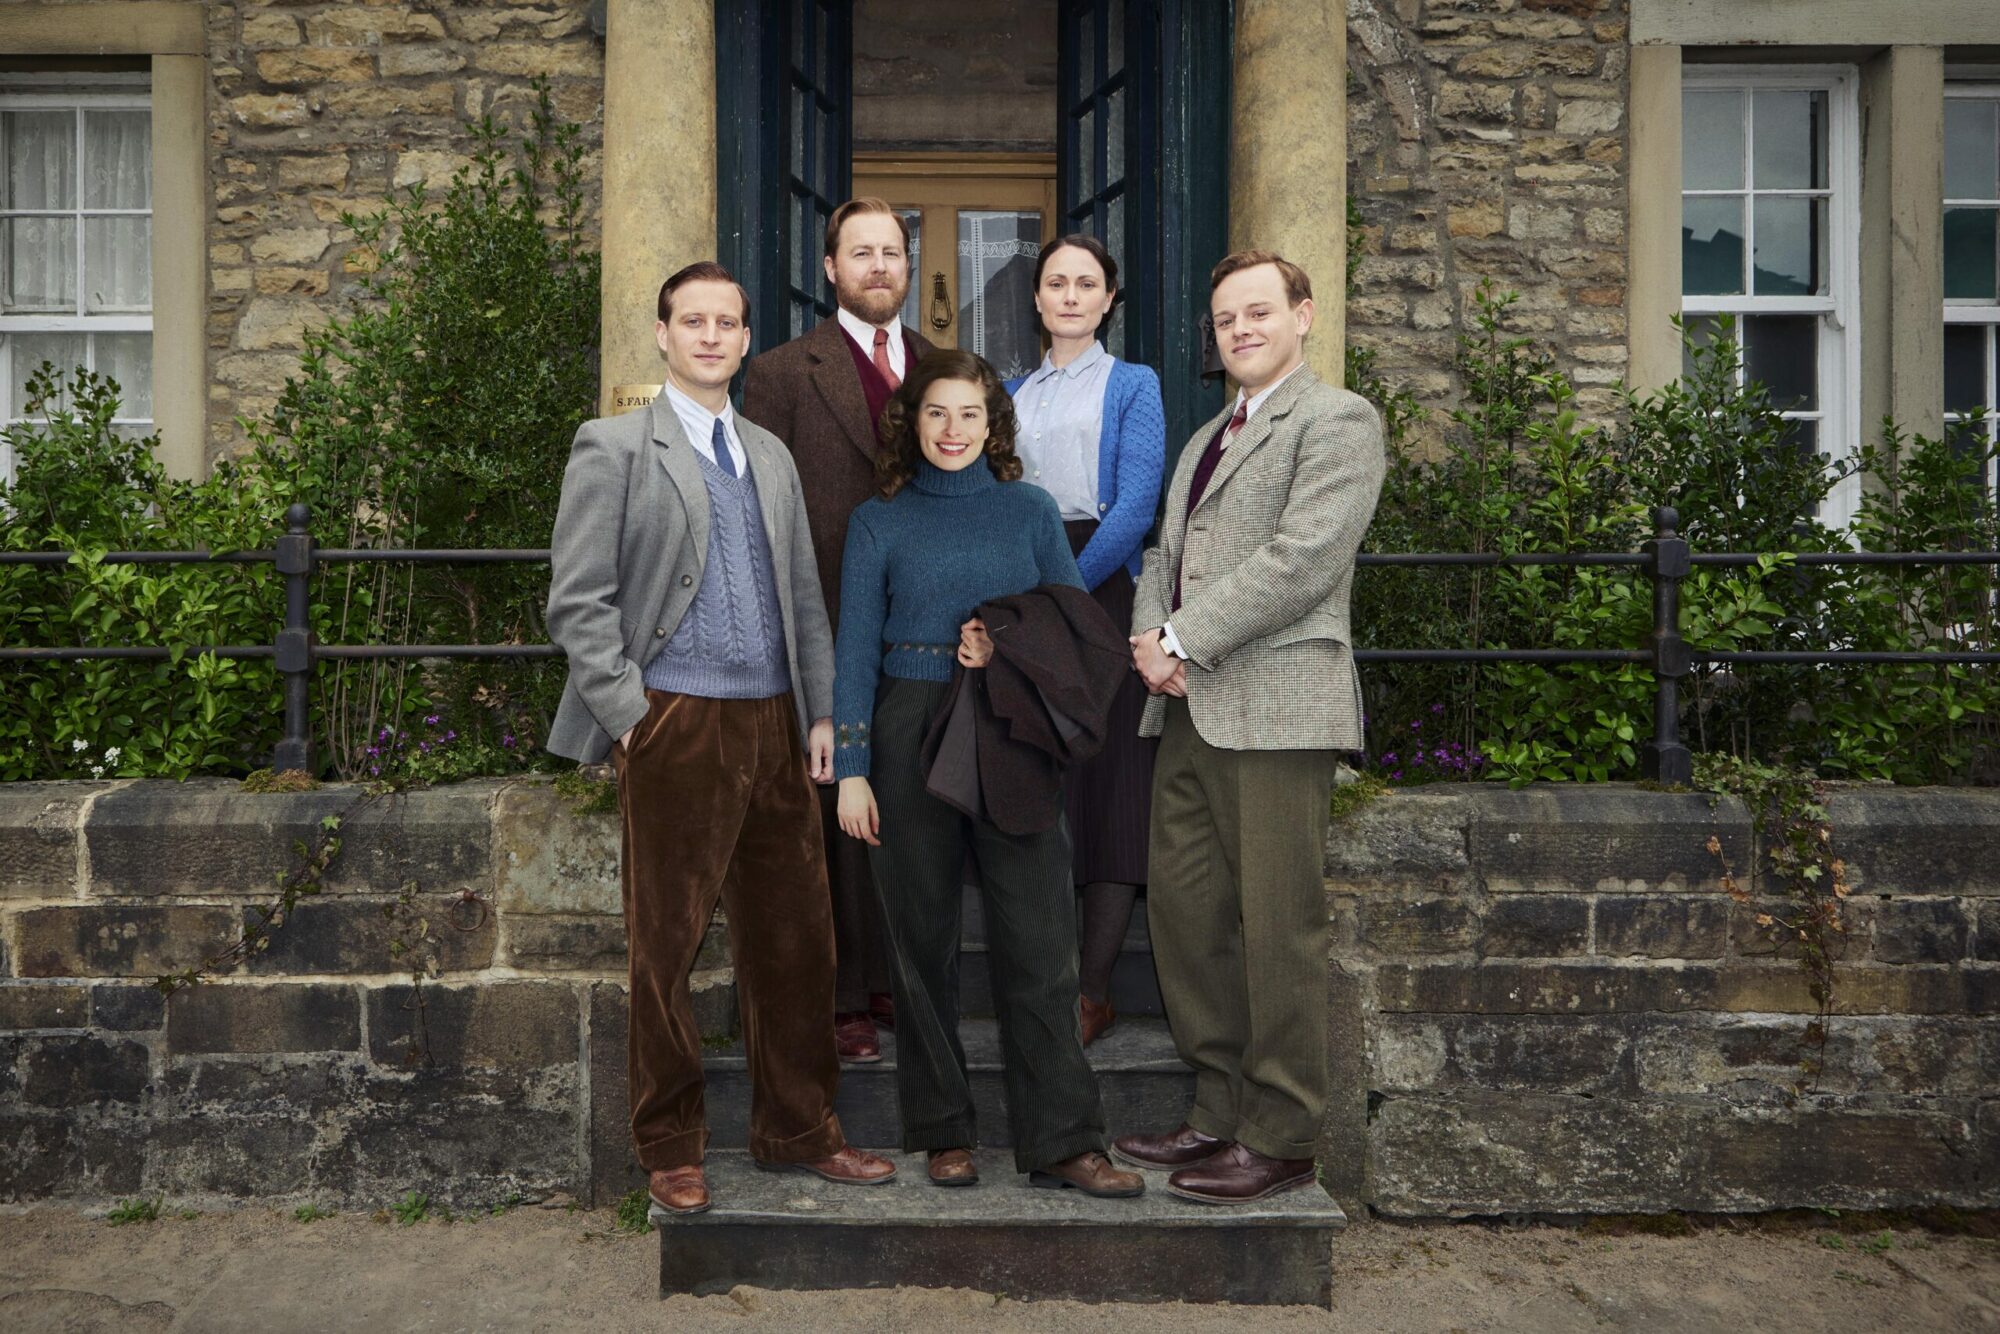 Image name FIRST LOOK 3 All Creatures Great and Small S3 Group Shot outside Skeldale L R James Siegfried Helen Mrs Hall Tristan scaled 1 the 1 image from the post All Creatures Great & Small Returns to UK Screens on Thursday 15th September 2022 in Yorkshire.com.